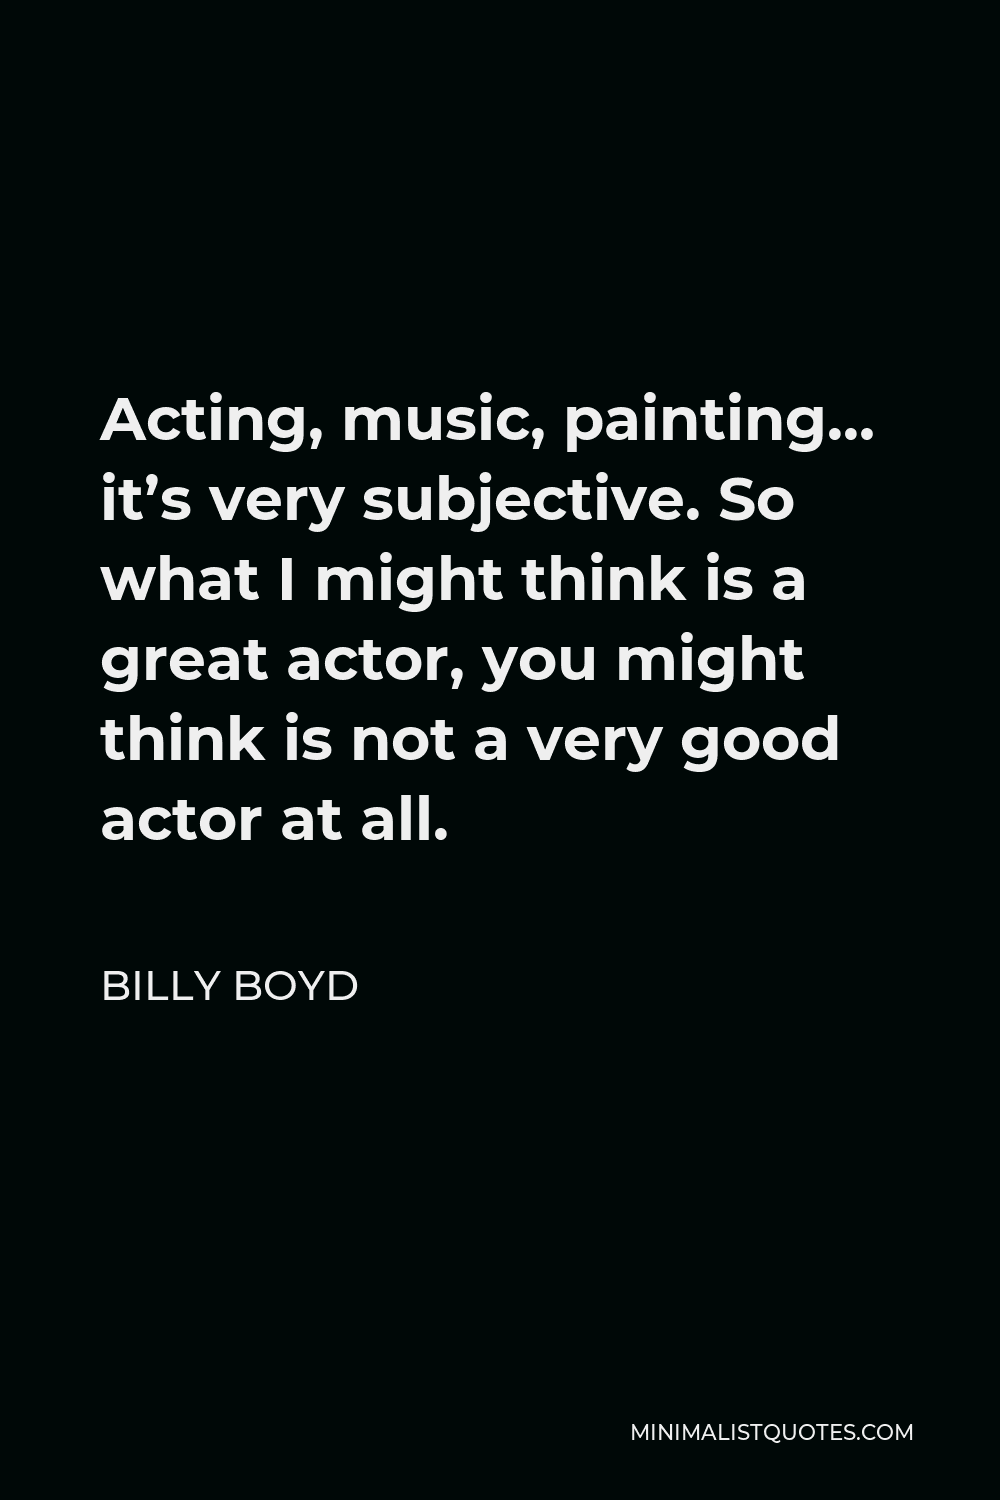 Billy Boyd Quote - Acting, music, painting… it’s very subjective. So what I might think is a great actor, you might think is not a very good actor at all.